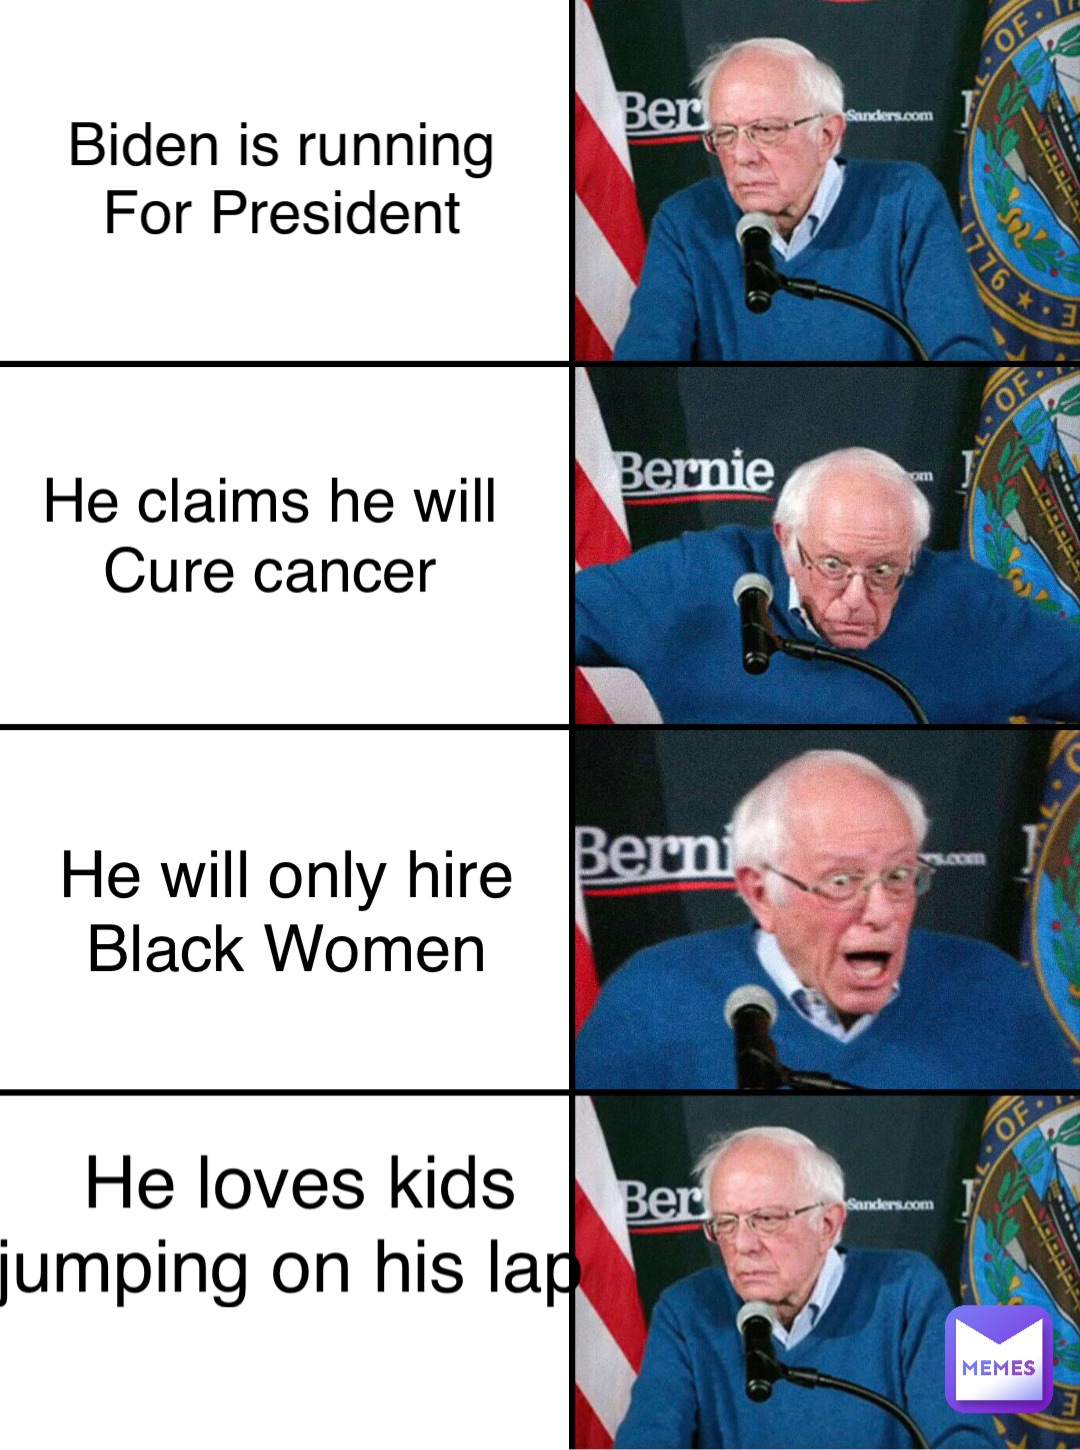 Biden is running
For President He claims he will
Cure cancer He will only hire
Black Women He loves kids 
jumping on his lap